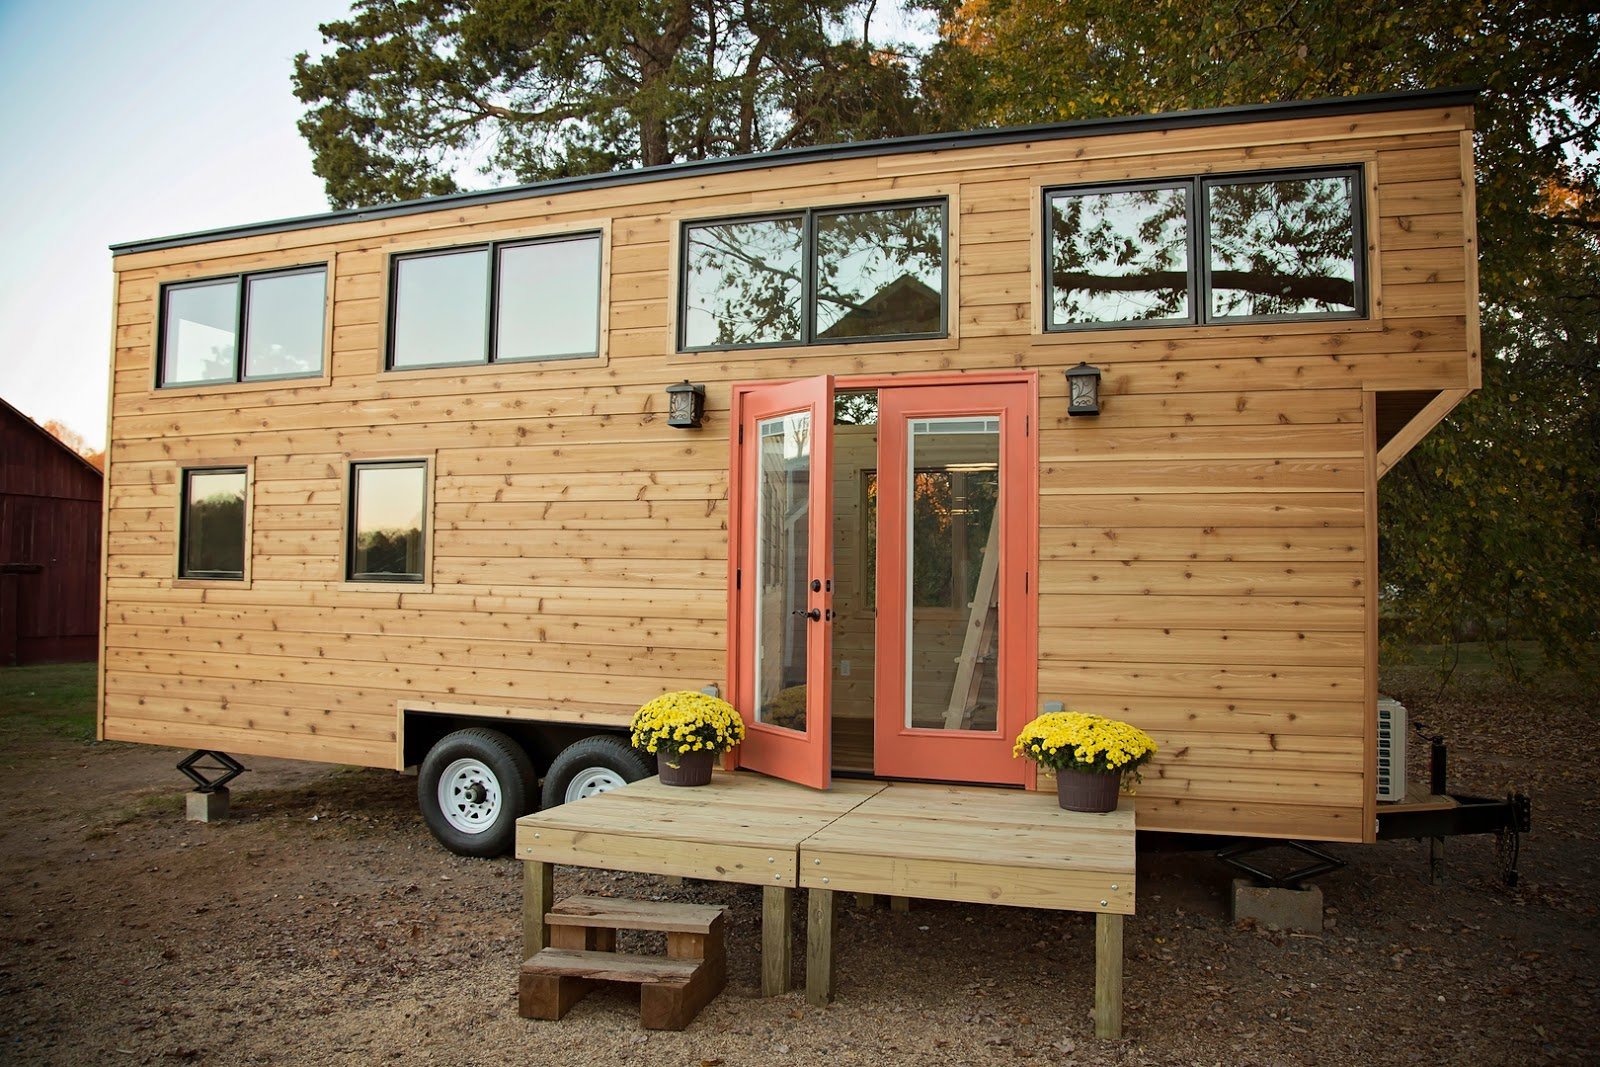 The 24' "Peponi" Custom Tiny House on Wheels by Perch & Nest